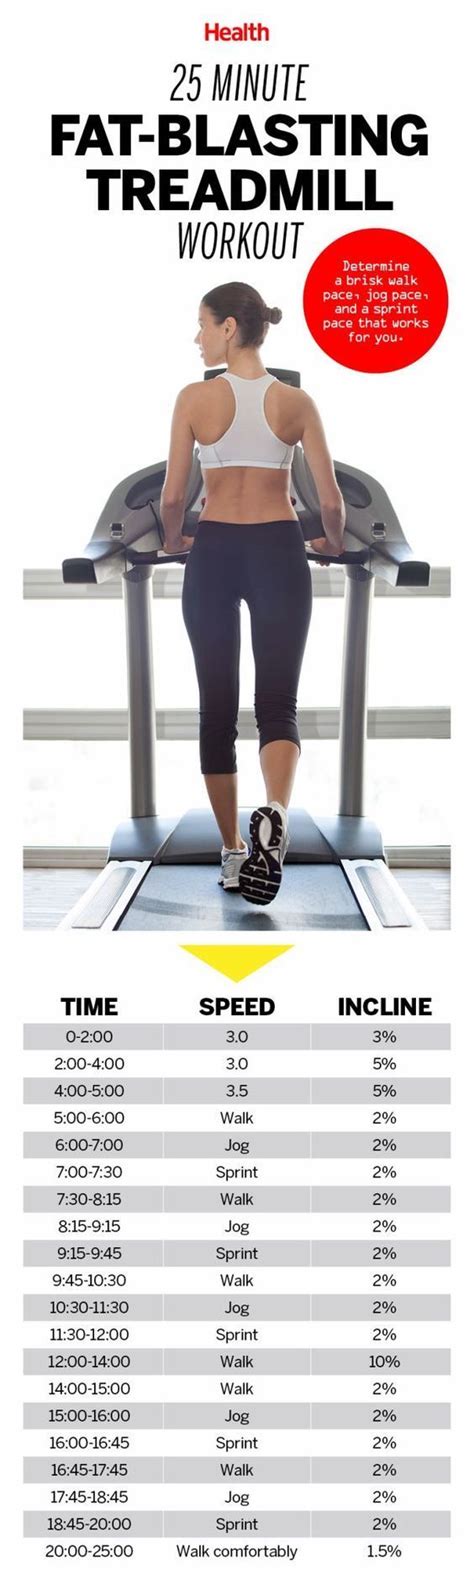 Cardio Workouts For Treadmill A Beginner S Guide Cardio For Weight Loss